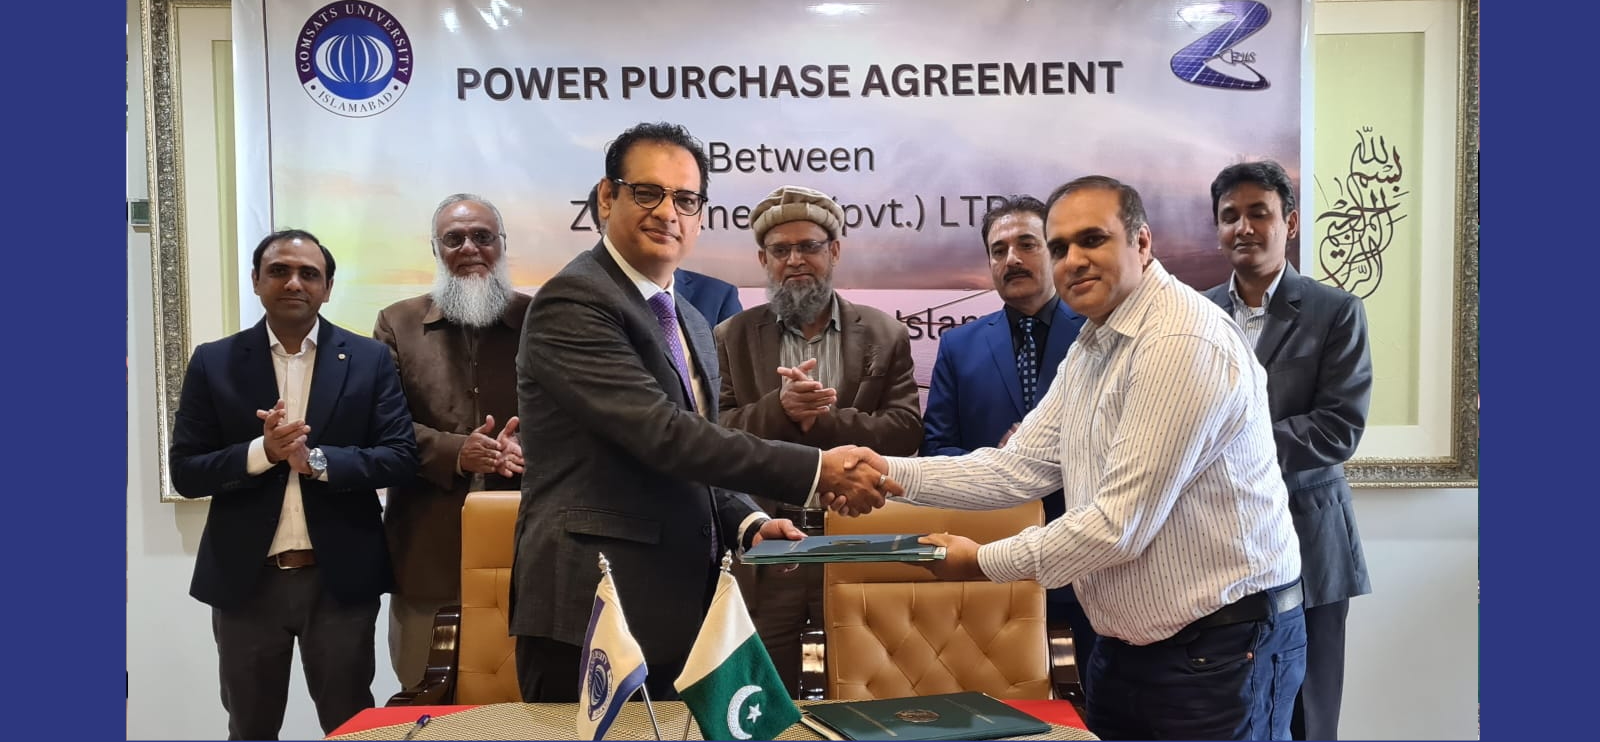 Dr. Sohail Asghar, the Incharge Islamabad campus, signed a contract with ZEUX Energy Pvt Ltd for the installation of an 850KW solar power generation system at  Islamabad campus